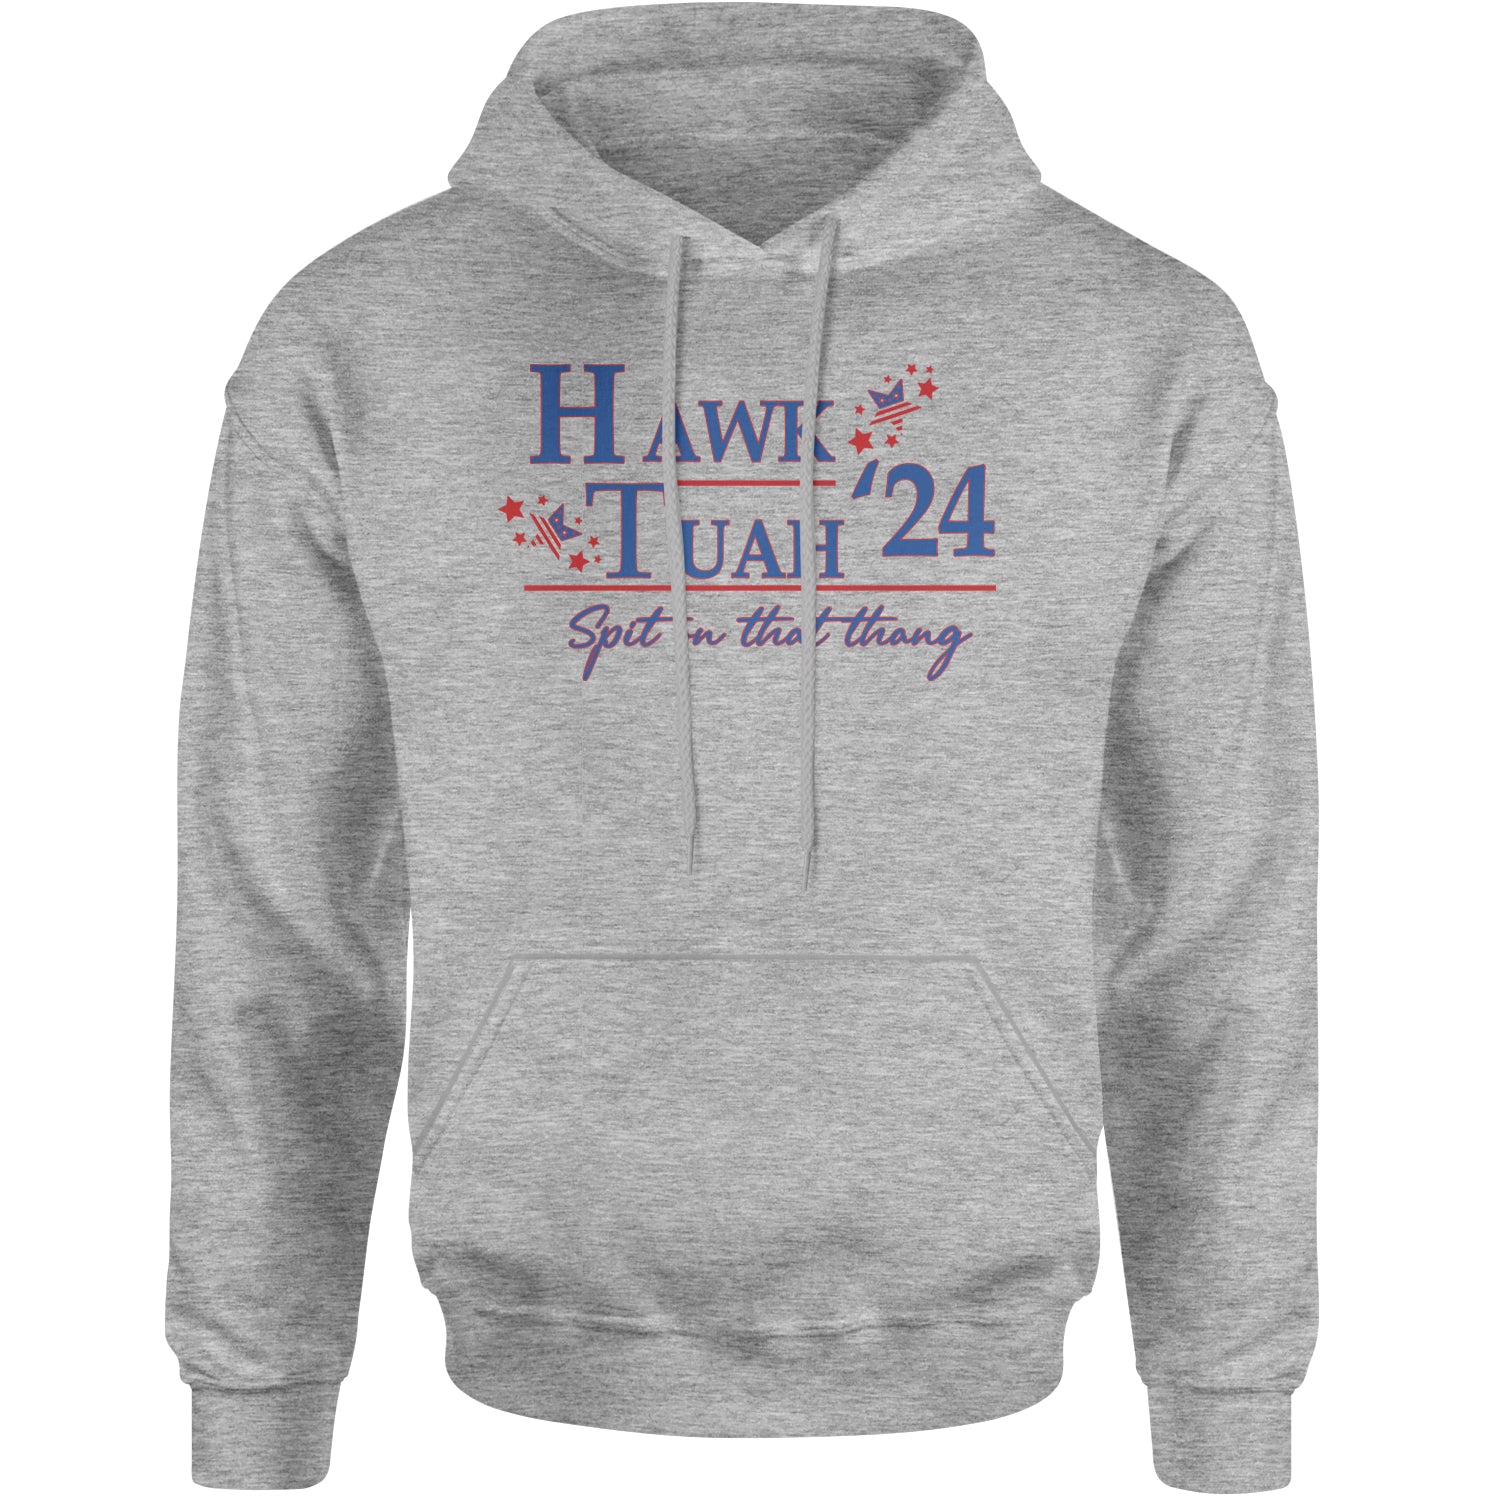 Vote For Hawk Tuah Spit On That Thang 2024 Adult Hoodie Sweatshirt Heather Grey